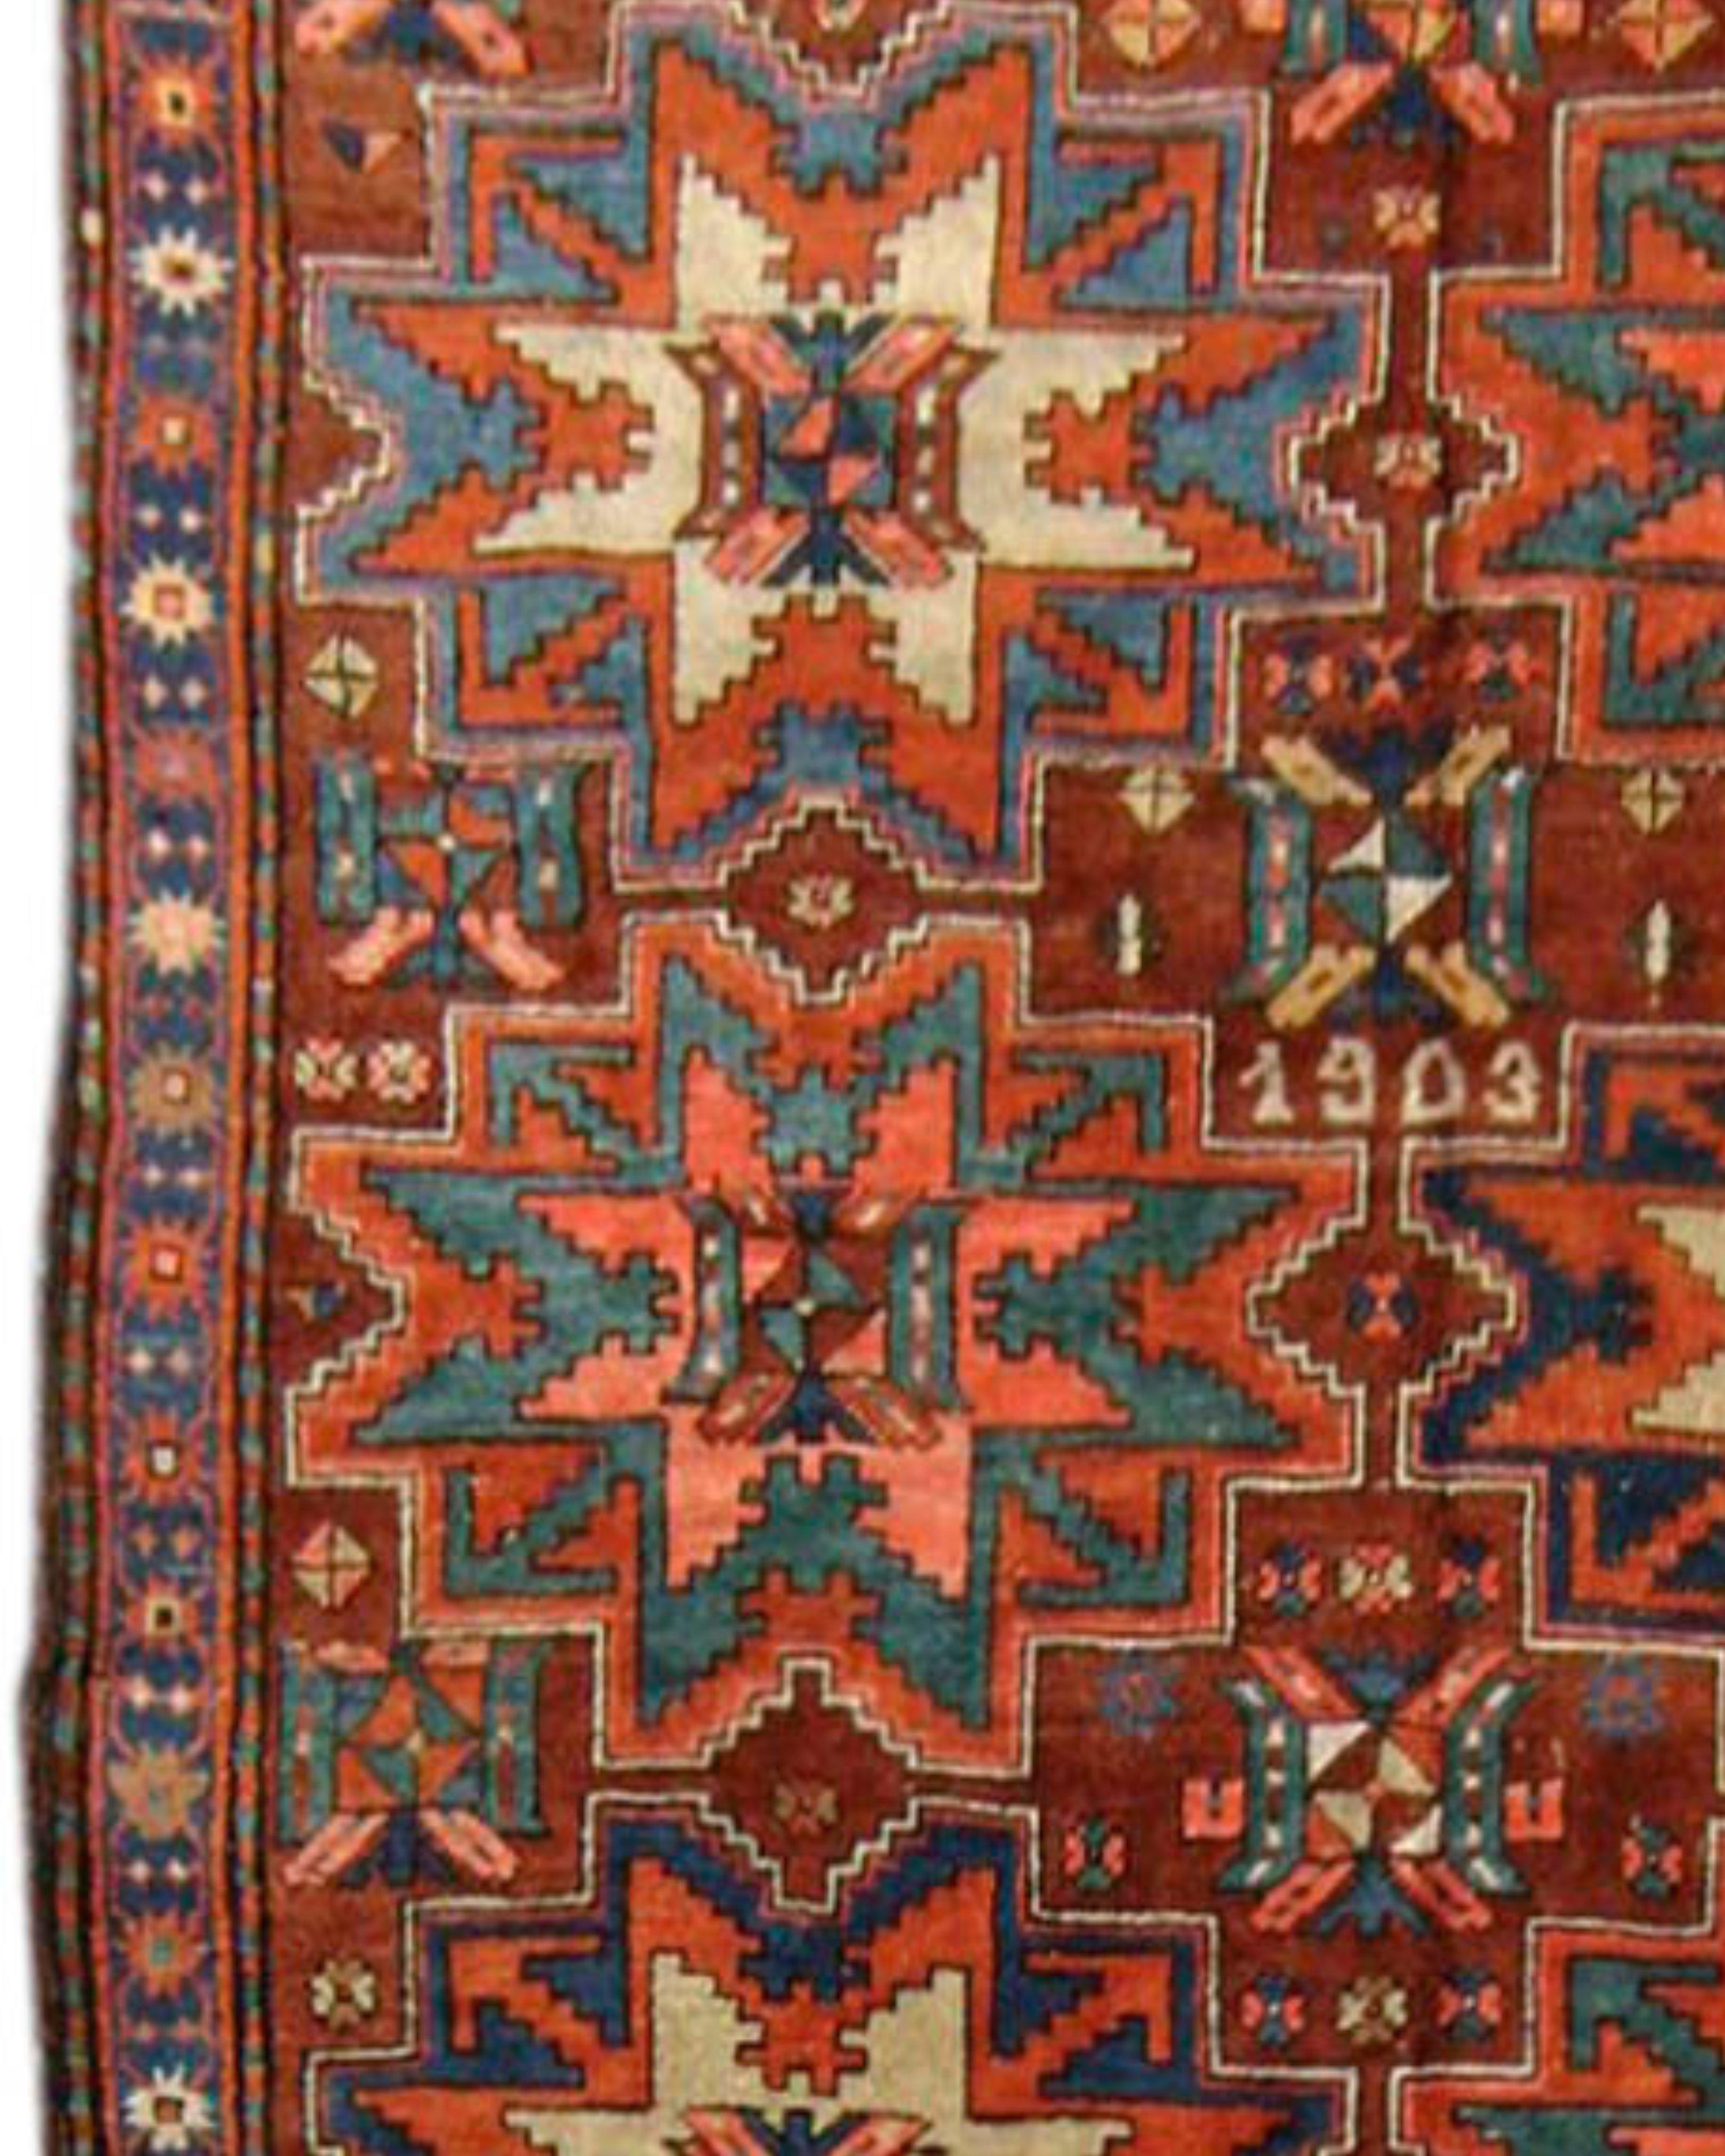 Antique Persian Karabagh Rug, Early 20th Century

Additional Information:
Dimensions: 5'1